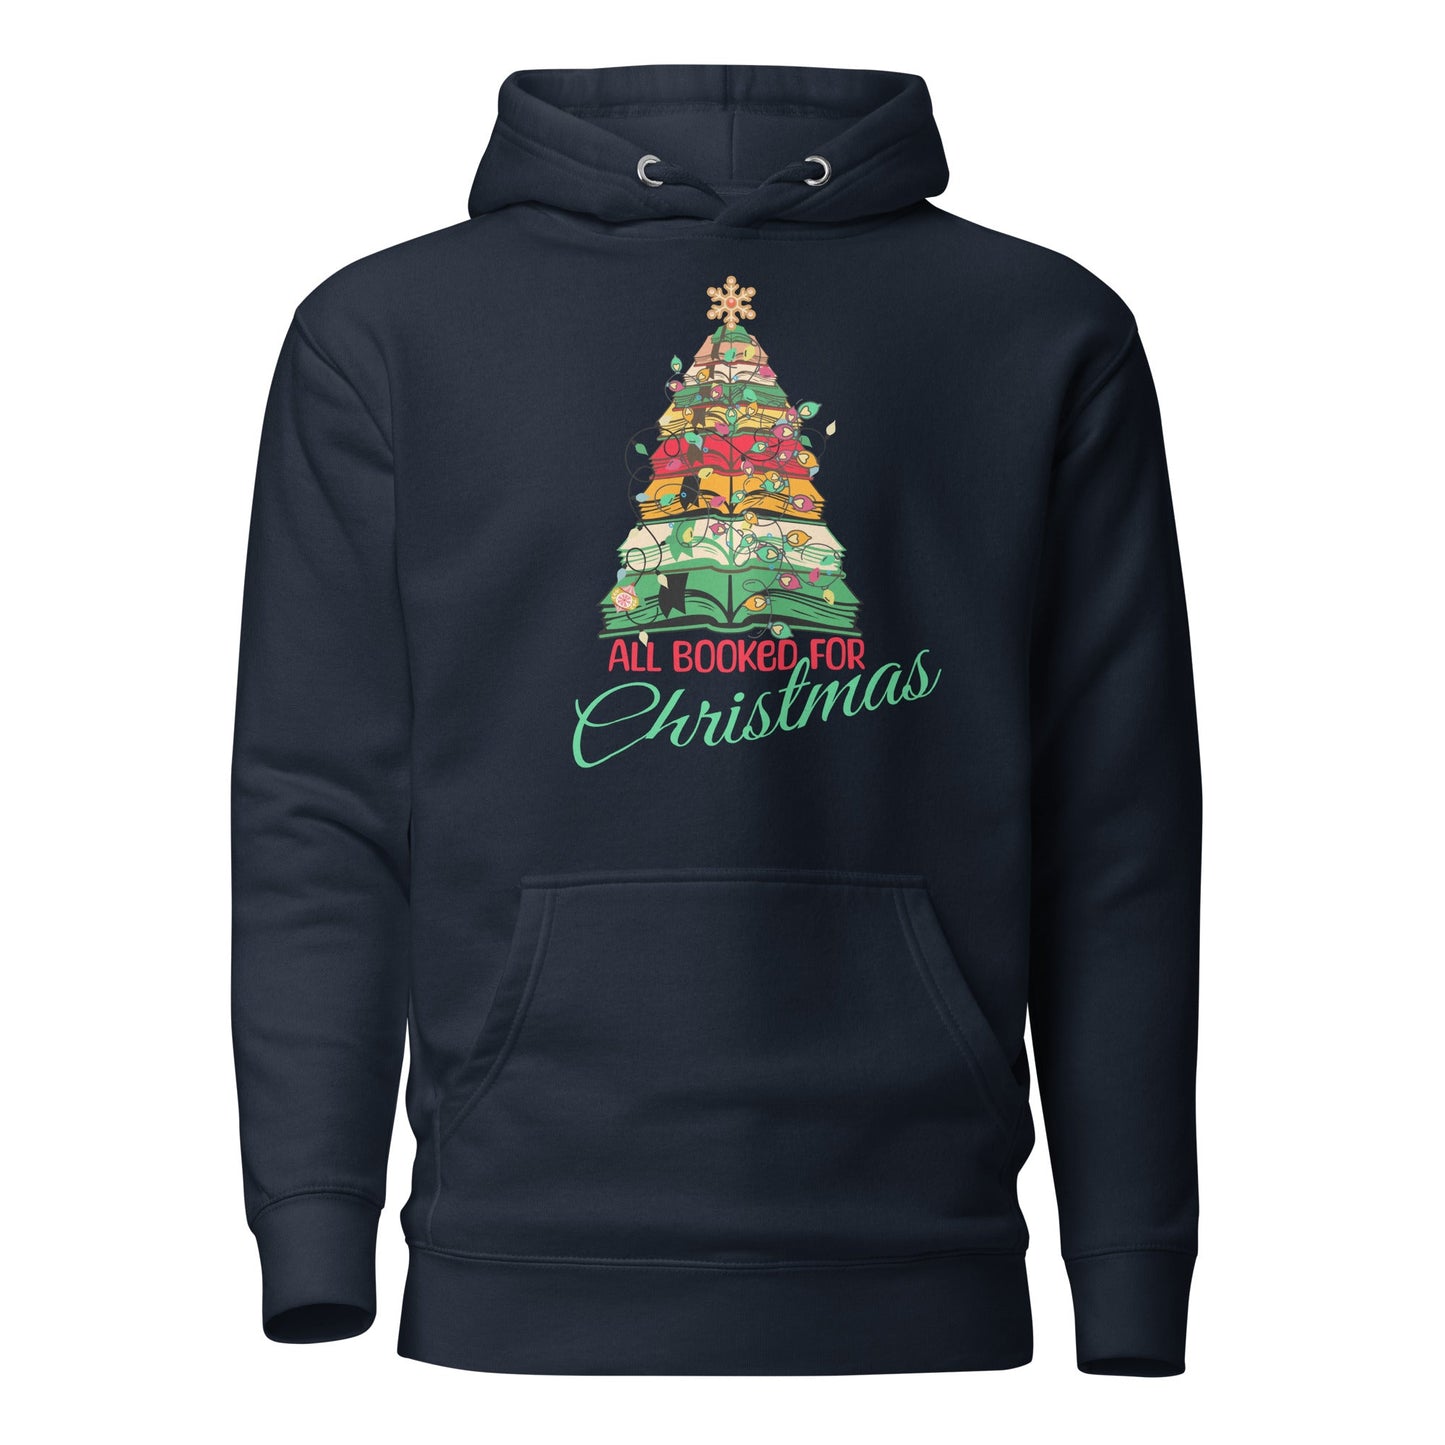 All Booked for Christmas Unisex Hoodie